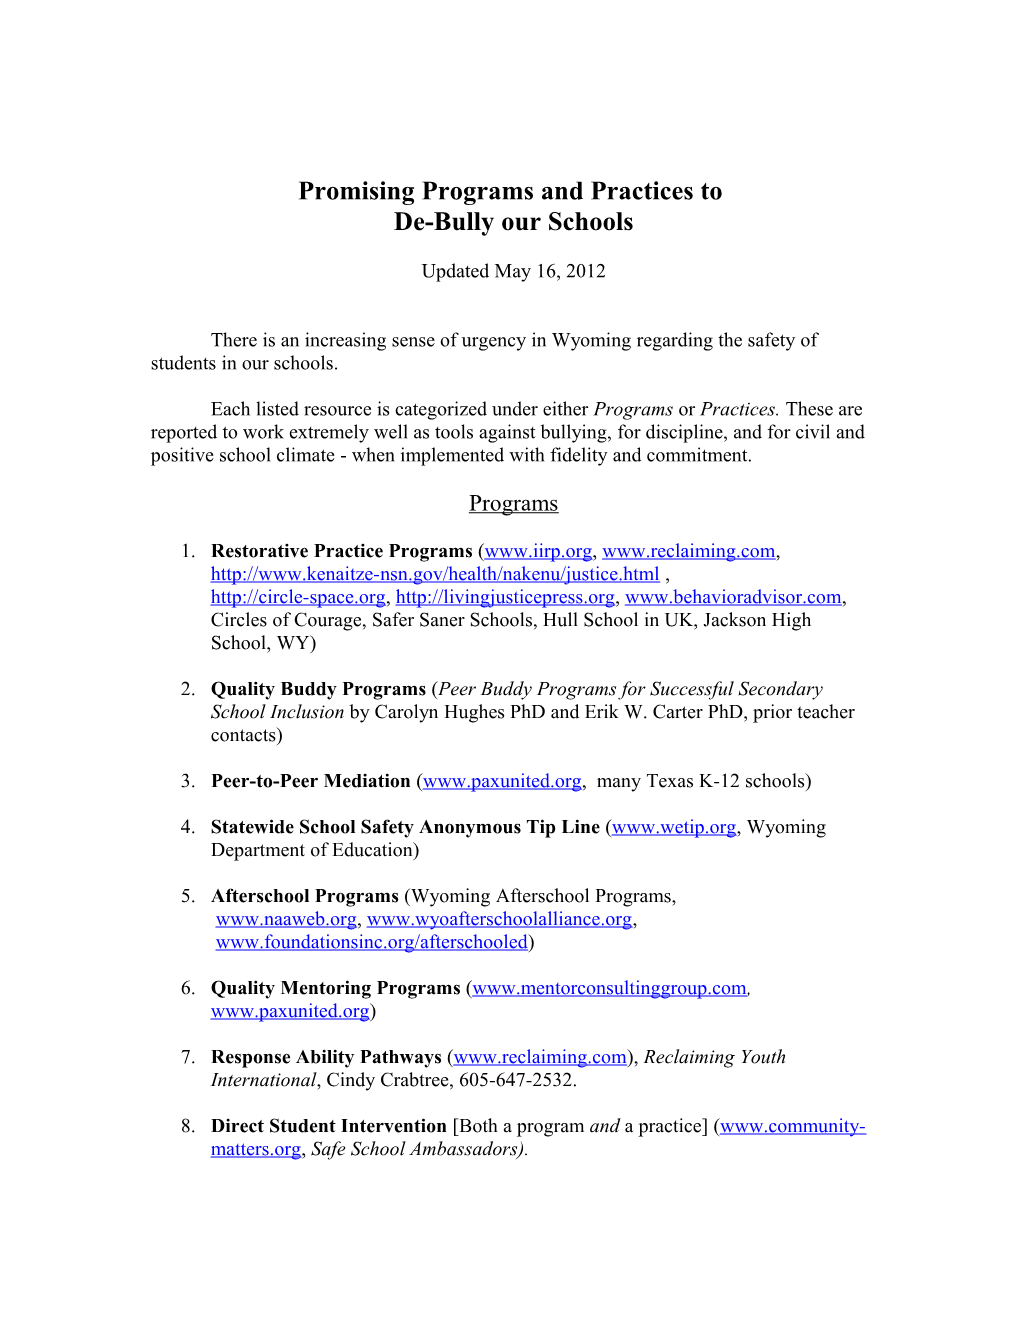 Promising Programs and Practices To